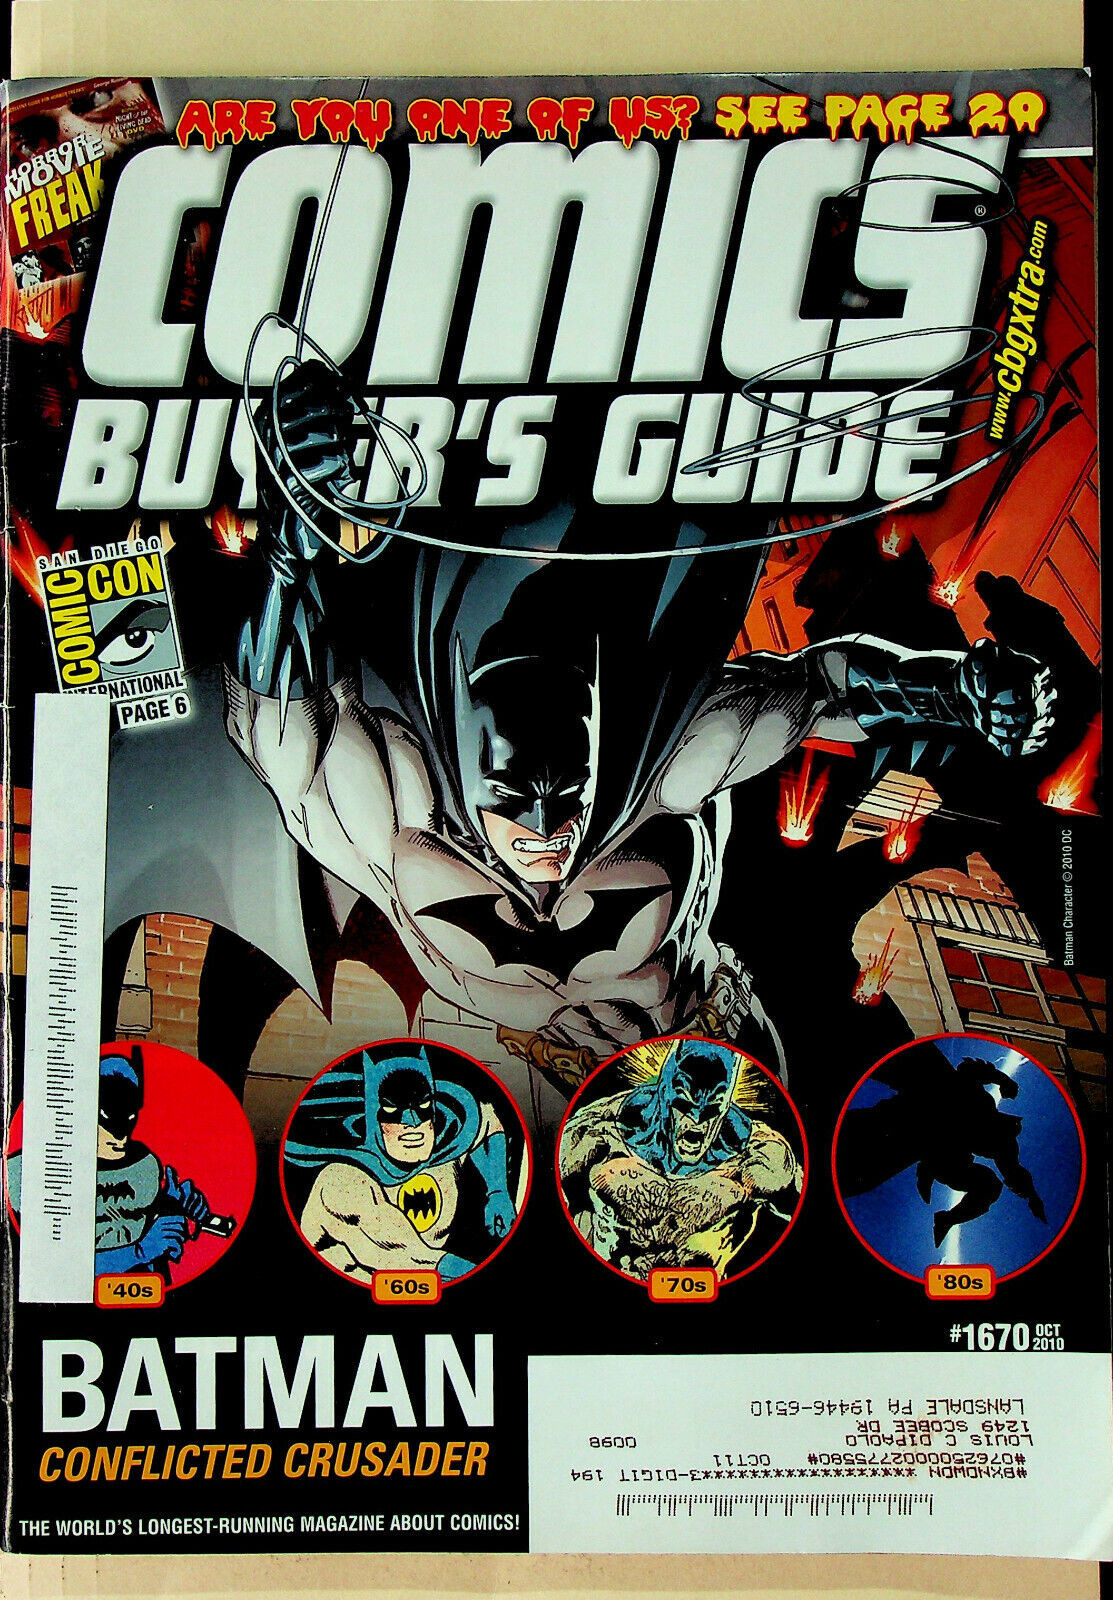 Primary image for Comic Buyer's Guide #1670 Oct 2010 - Krause Publications